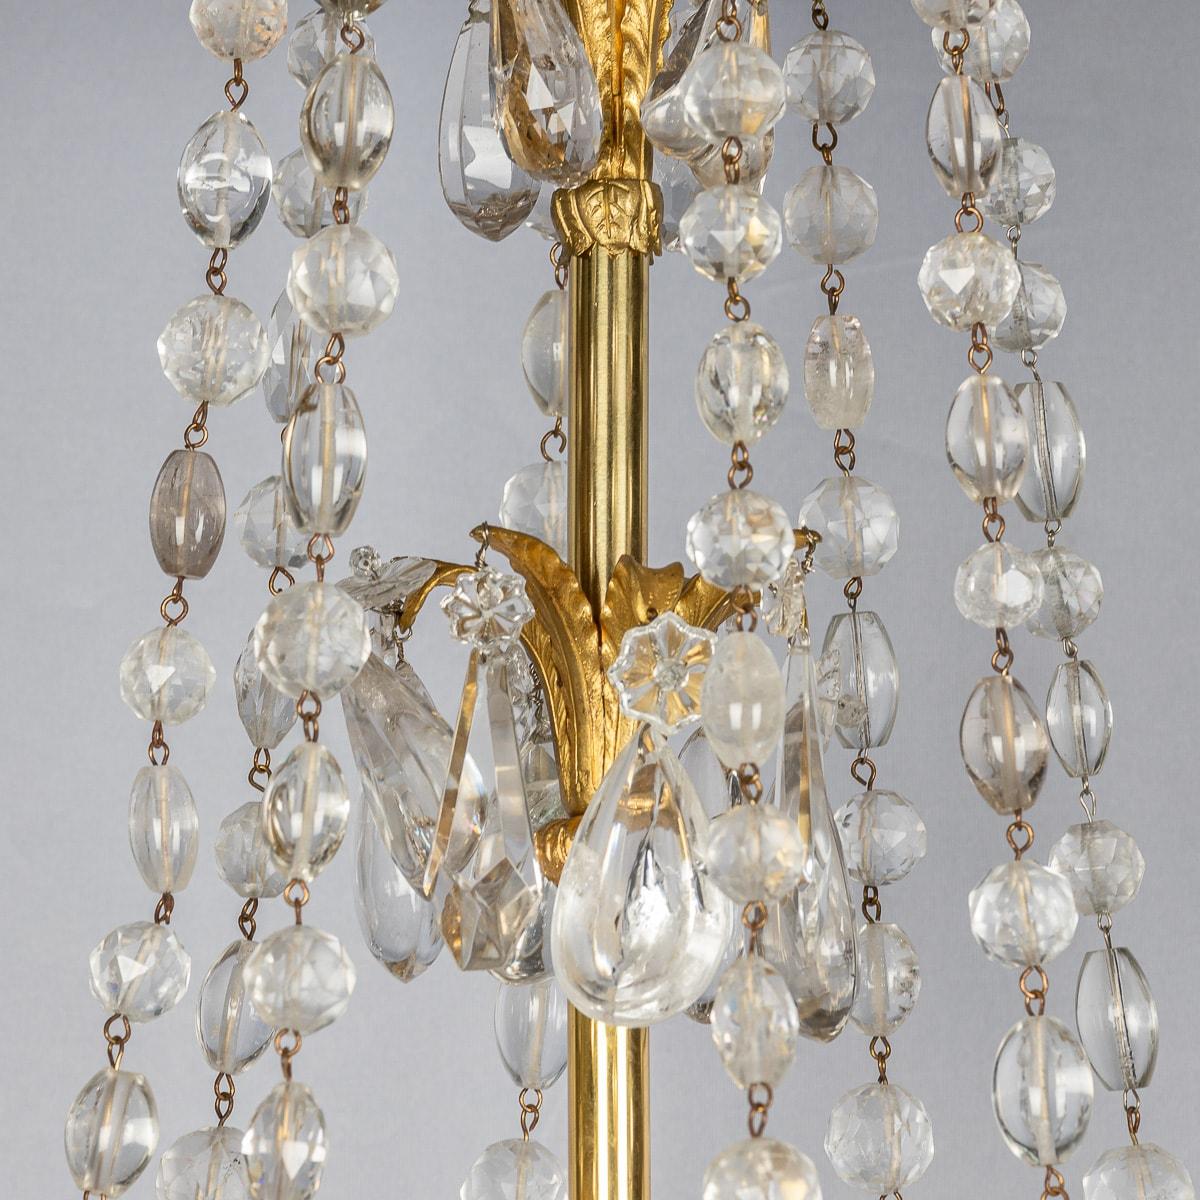 Antique 18th Century French Ormolu & Cut Rock Crystal Chandelier c.1770 In Good Condition For Sale In Royal Tunbridge Wells, Kent